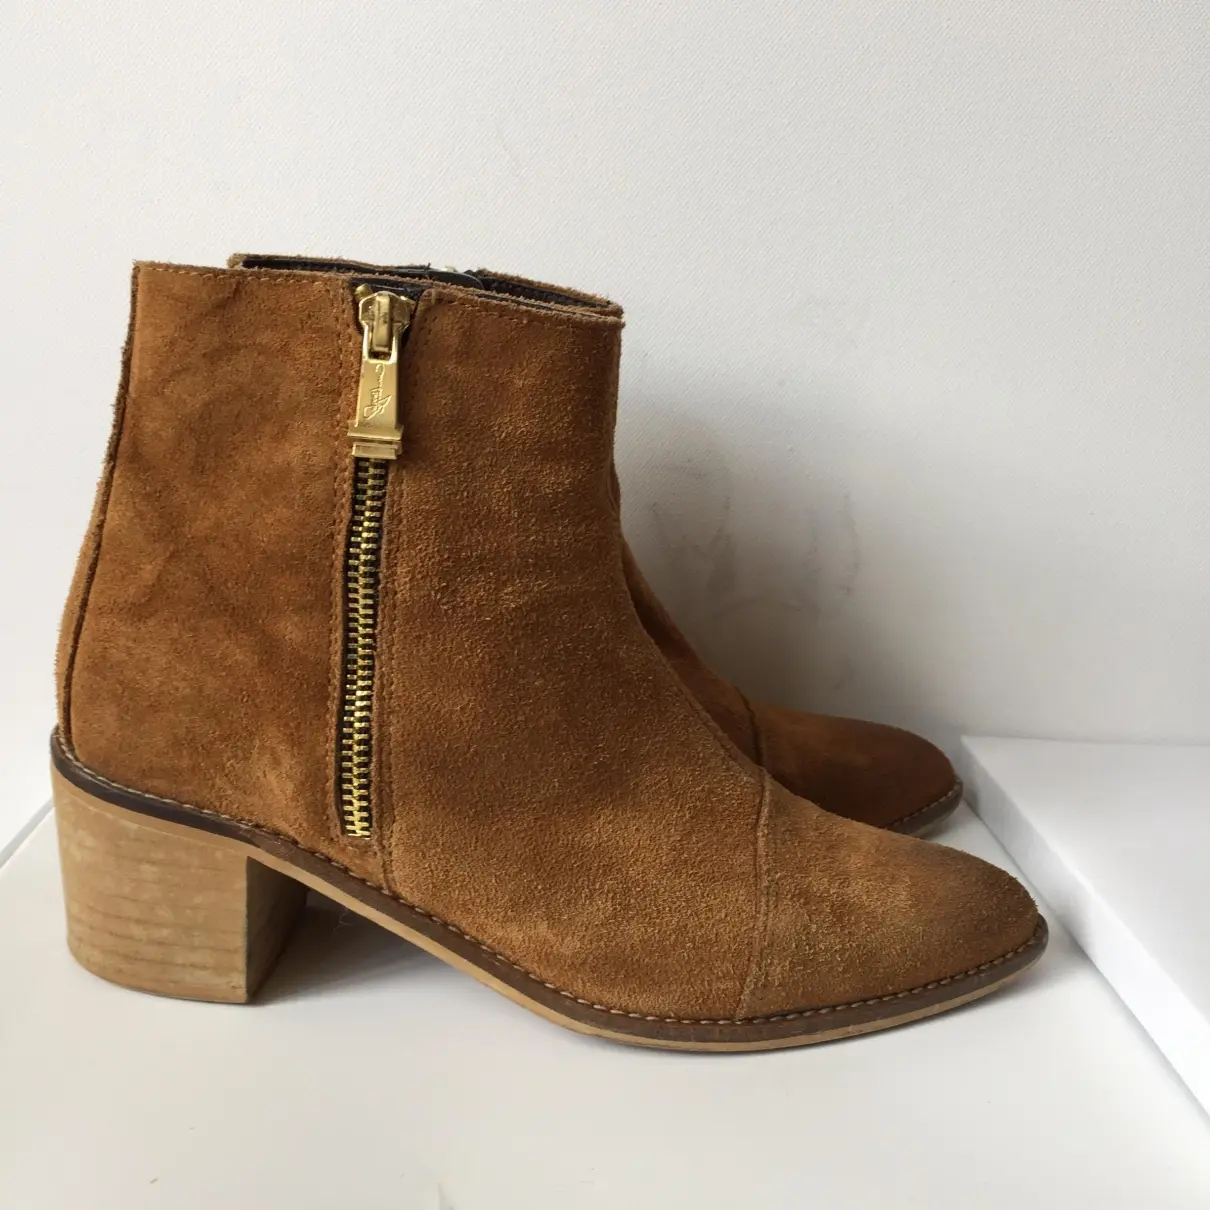 Nasty Gal Ankle boots for sale